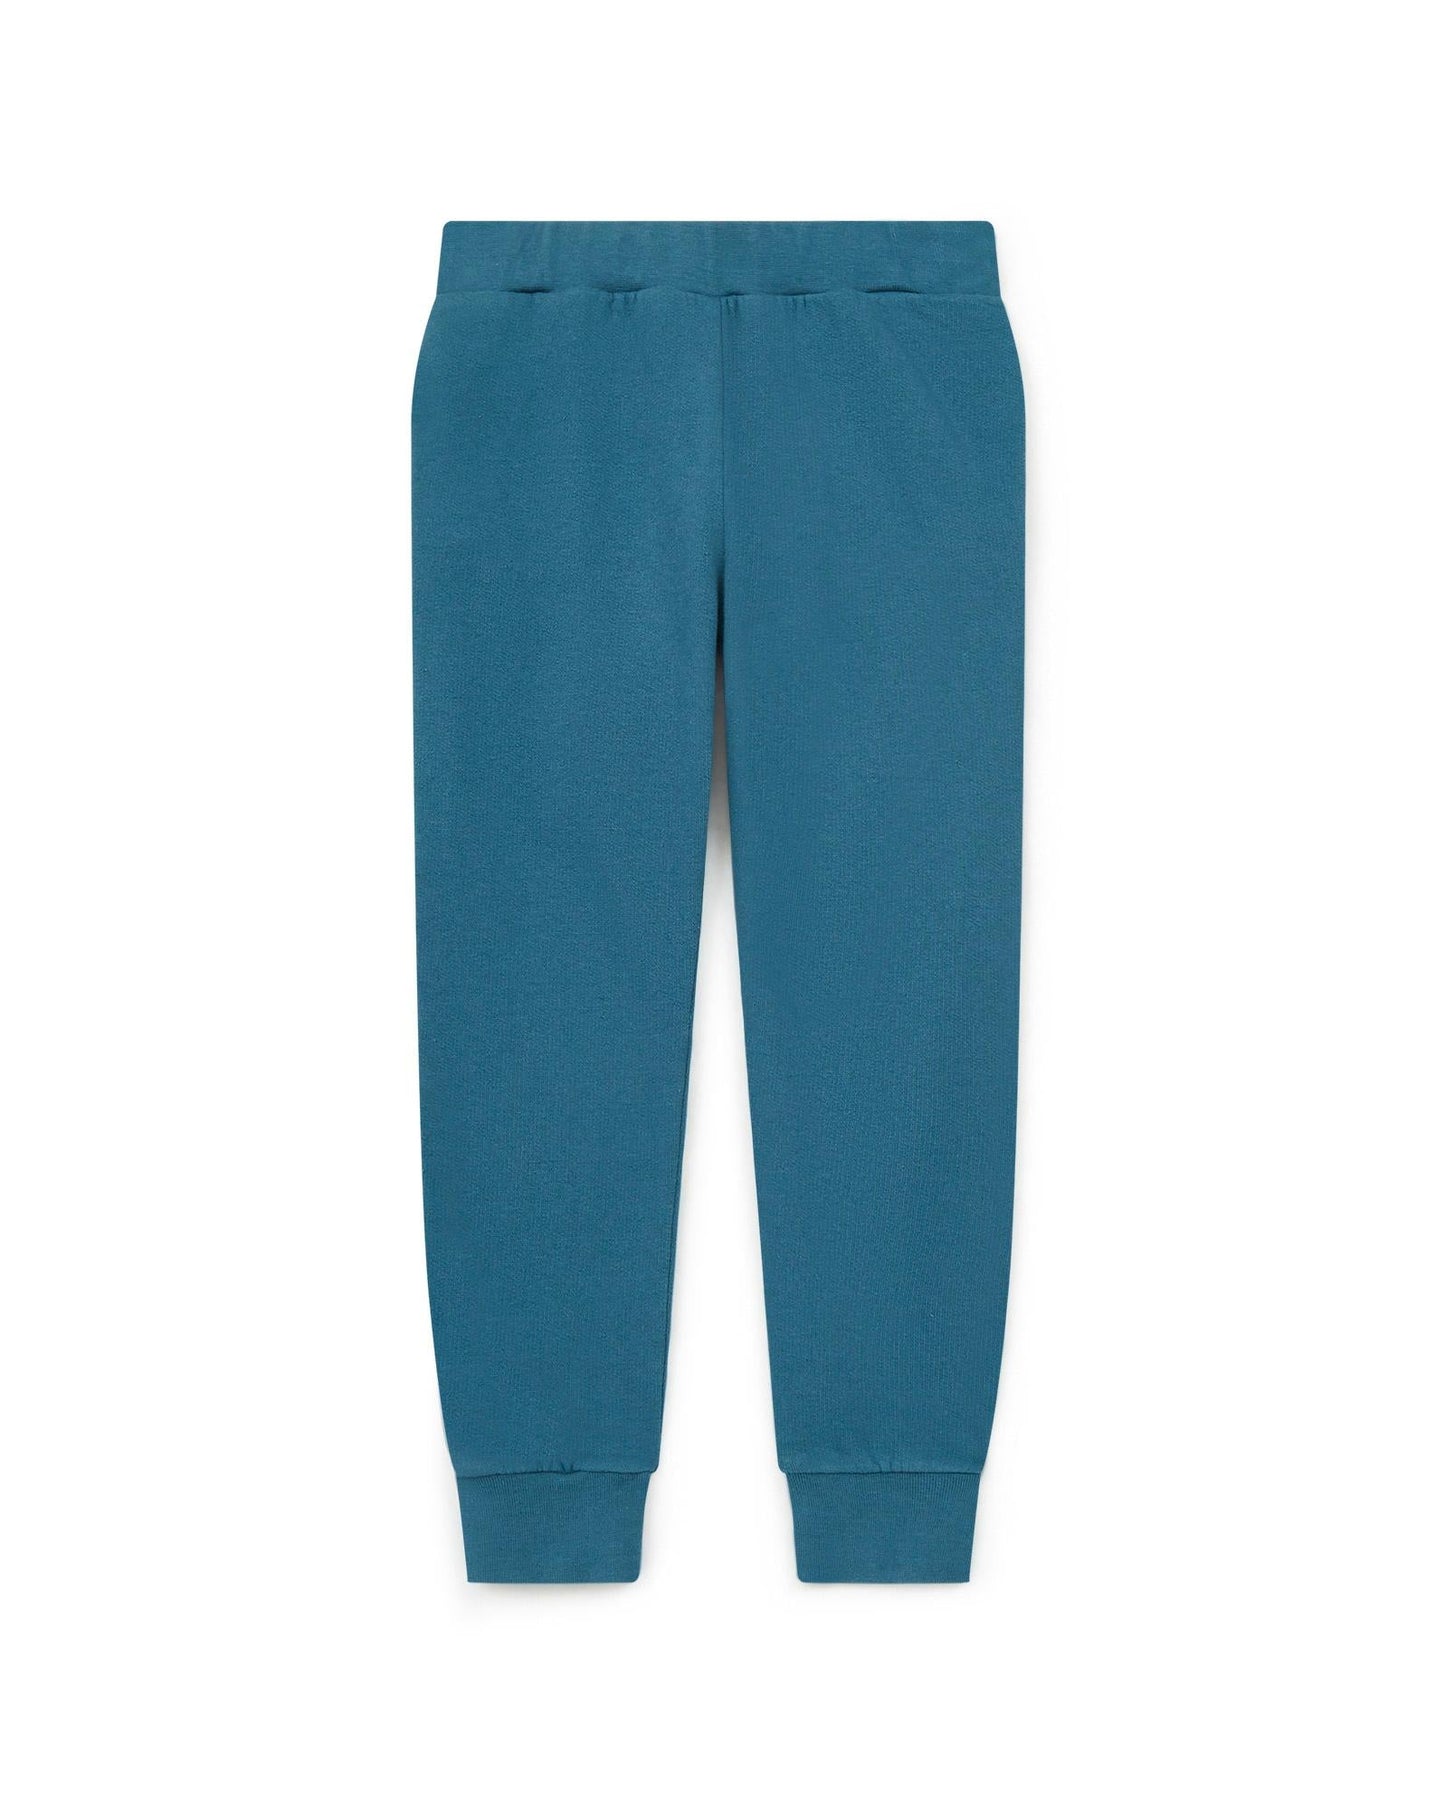 Trousers - Jogging - Blue in 100% cotton